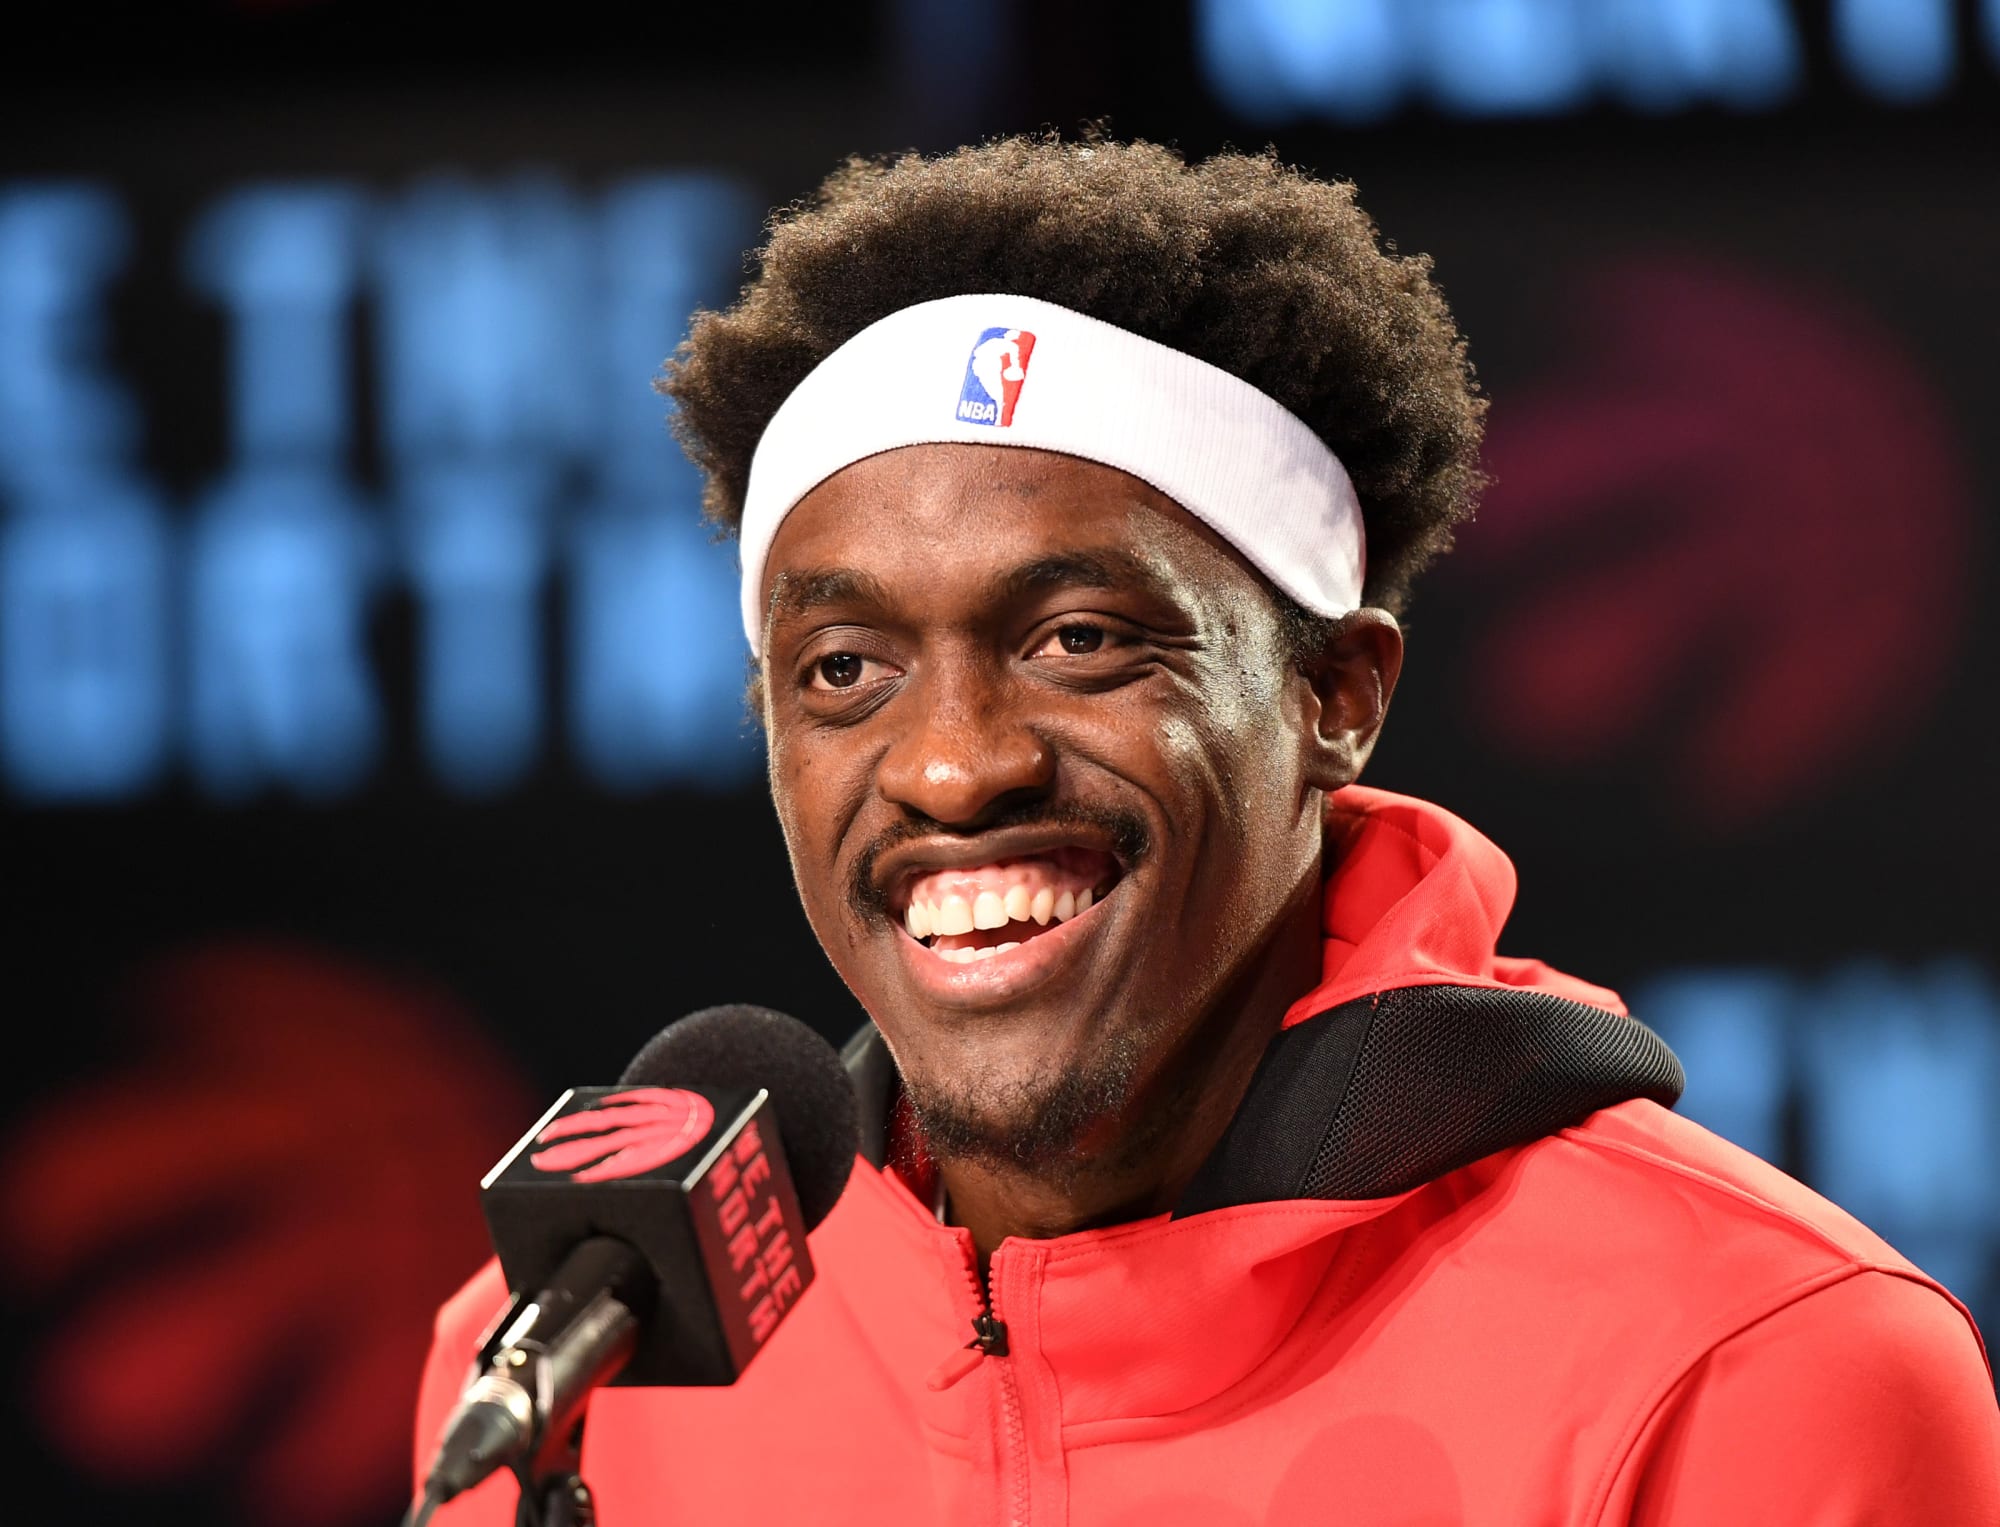 Raptors: Pascal Siakam ready to lead, take his game to a new level